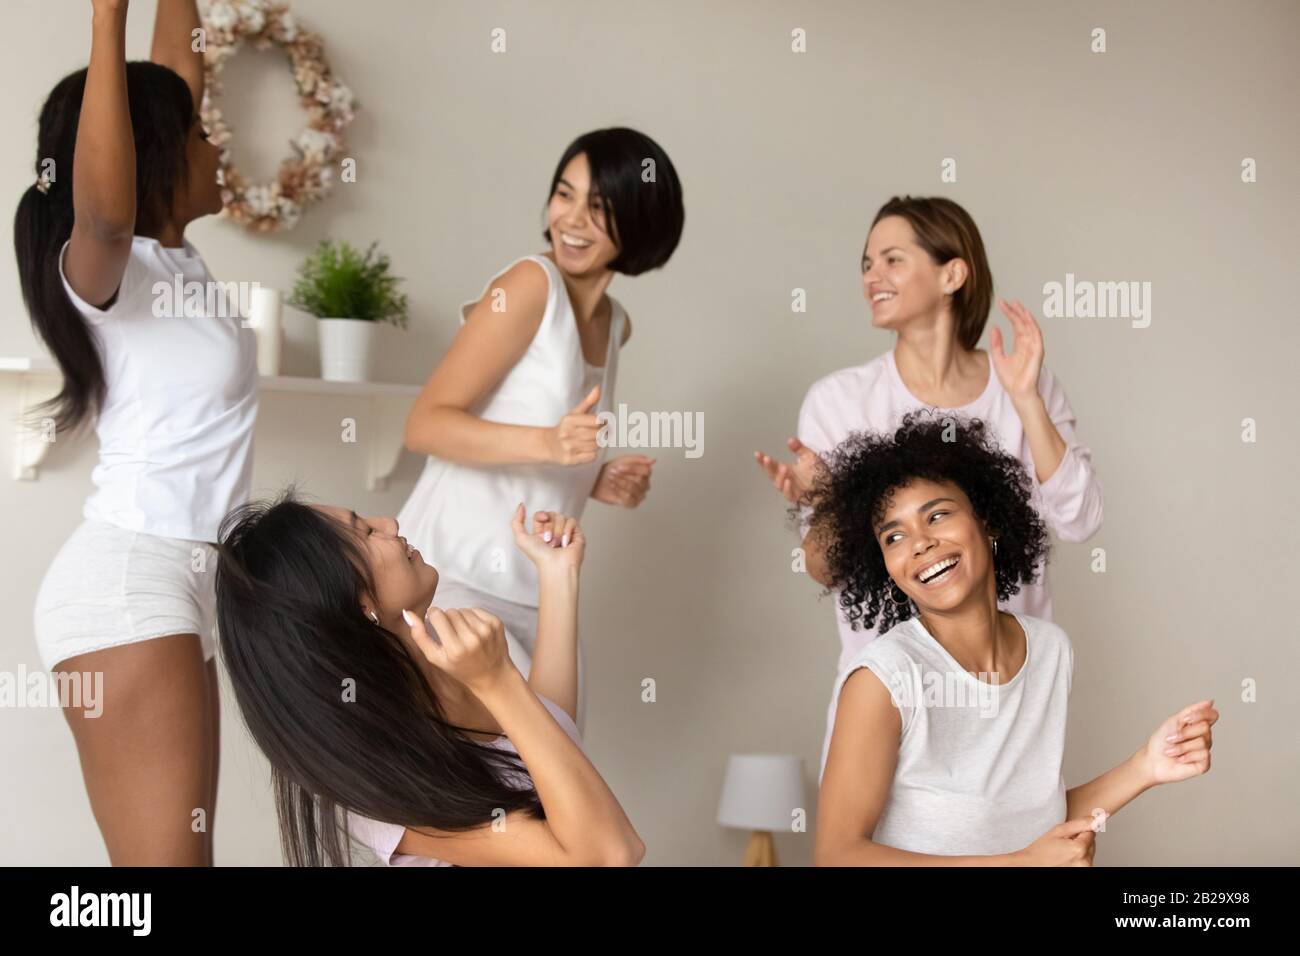 Pretty African American girl dancing with friends at sleepover party Stock Photo